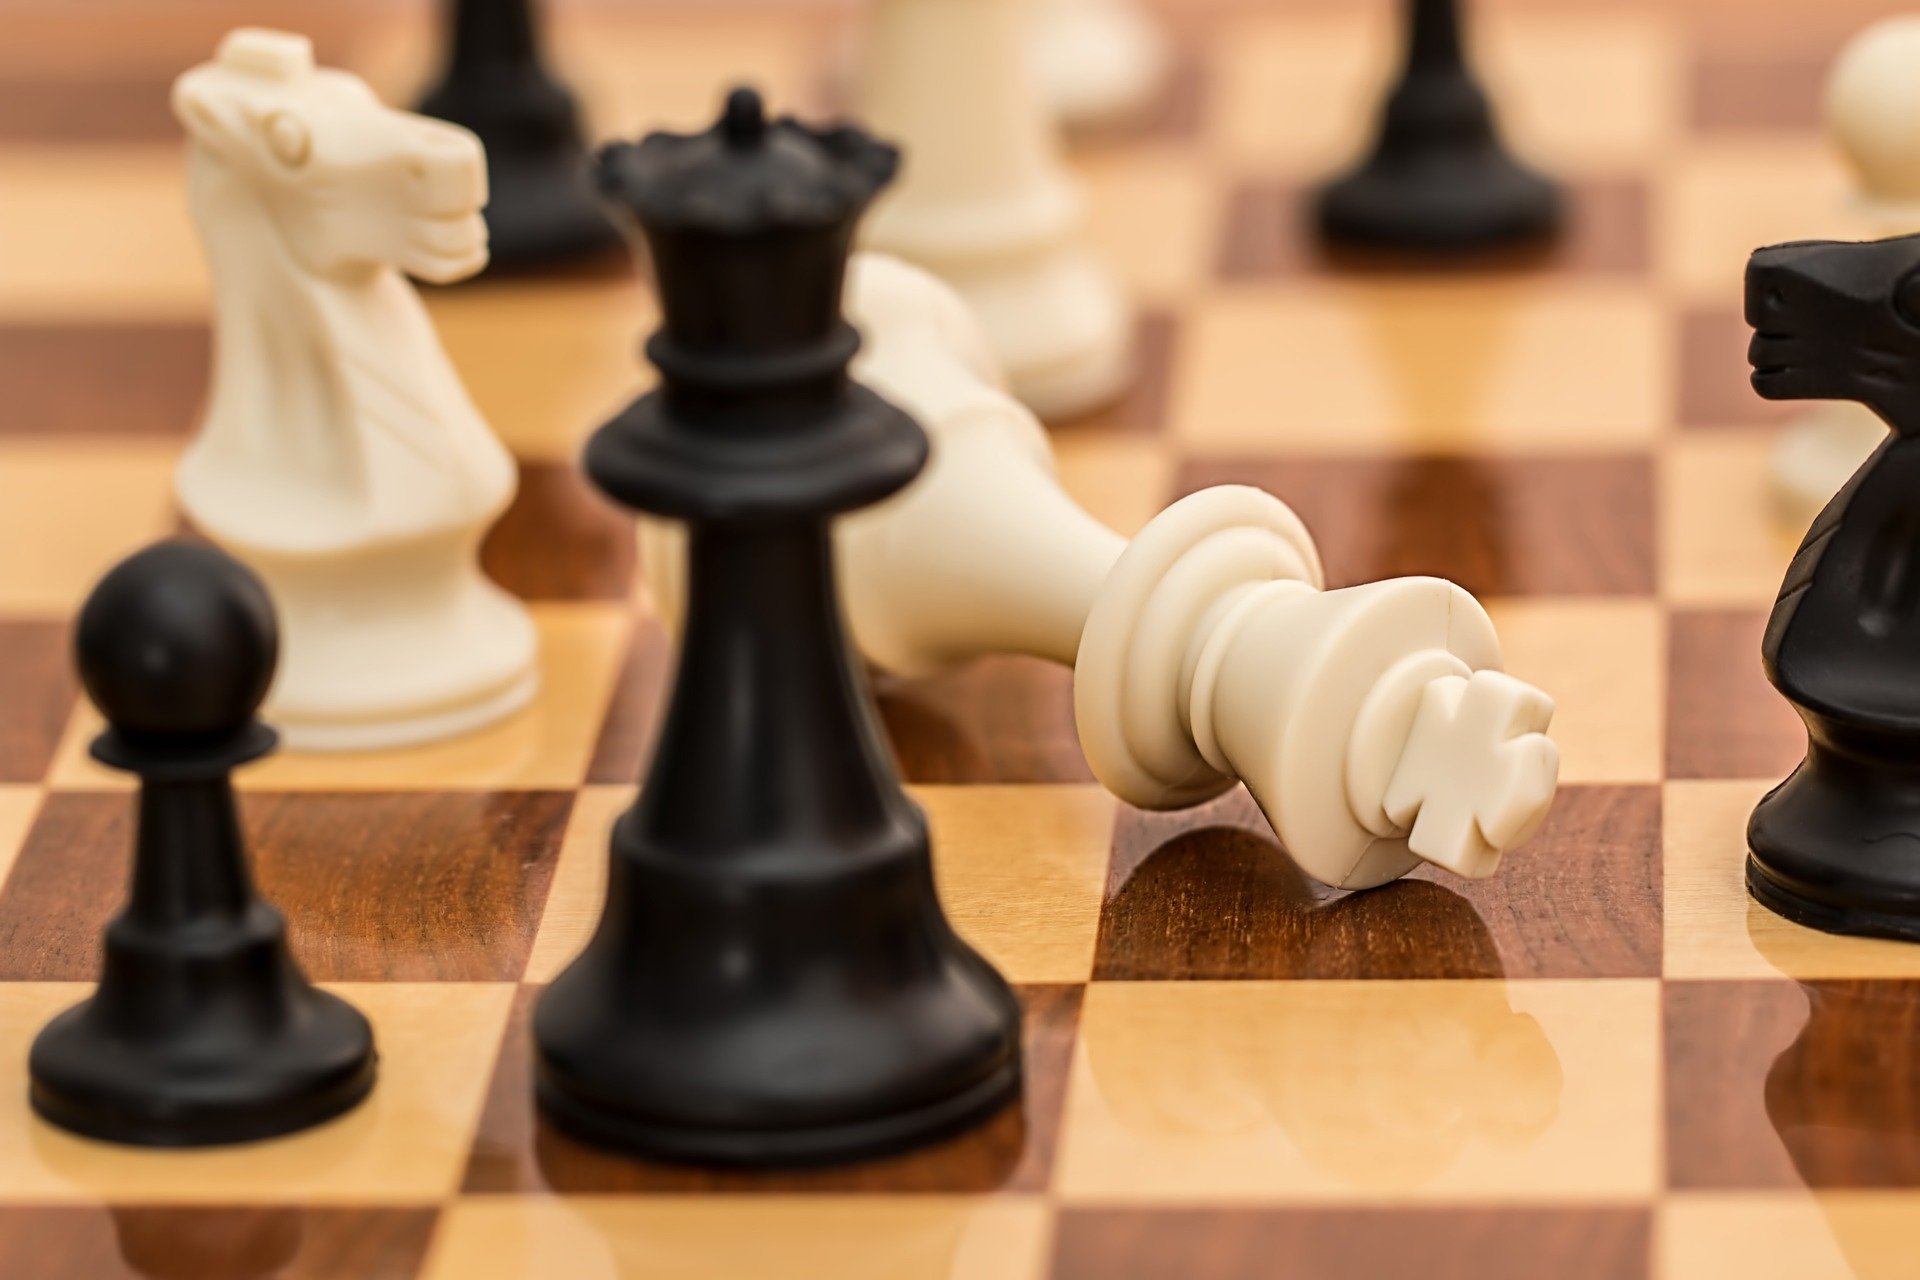 Why does white always go first in chess?